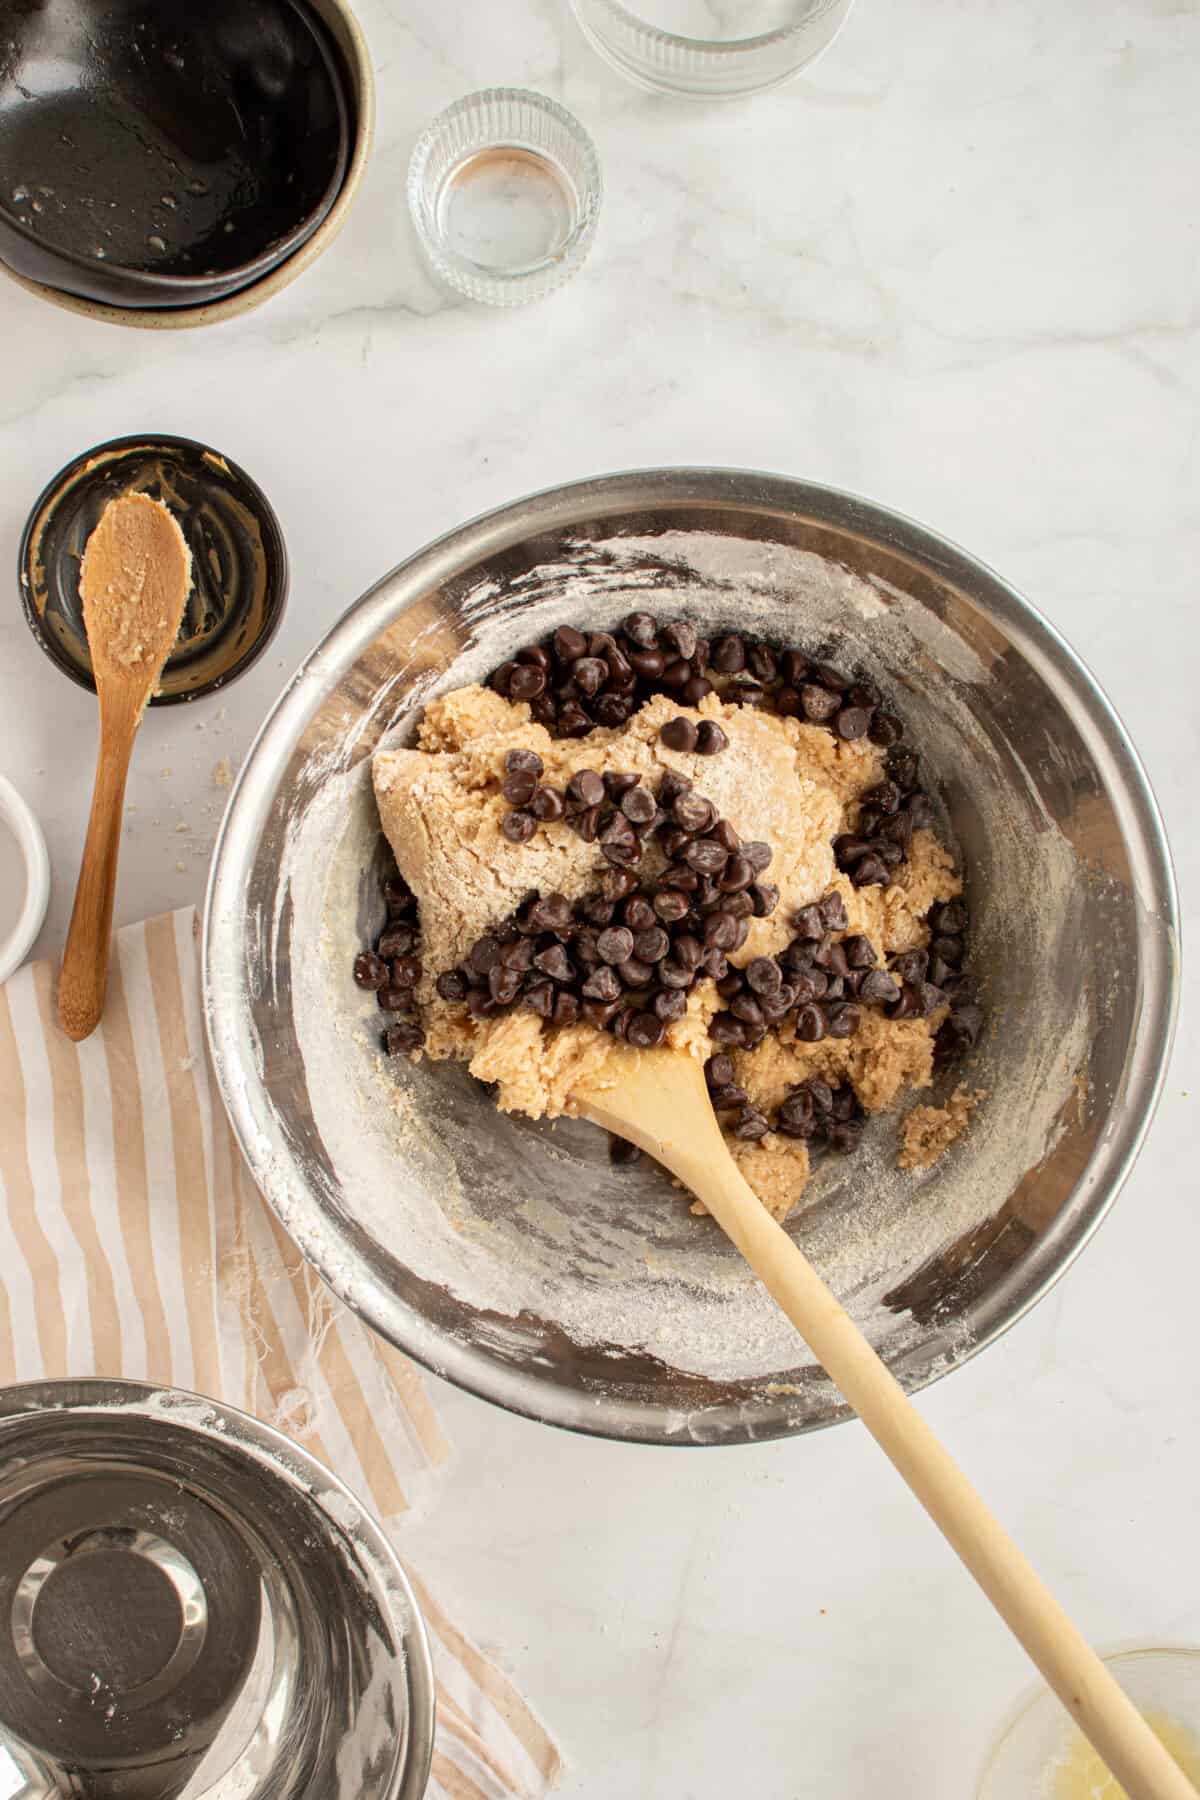 Wooden spoon folding chocolate chips into cookie dough.